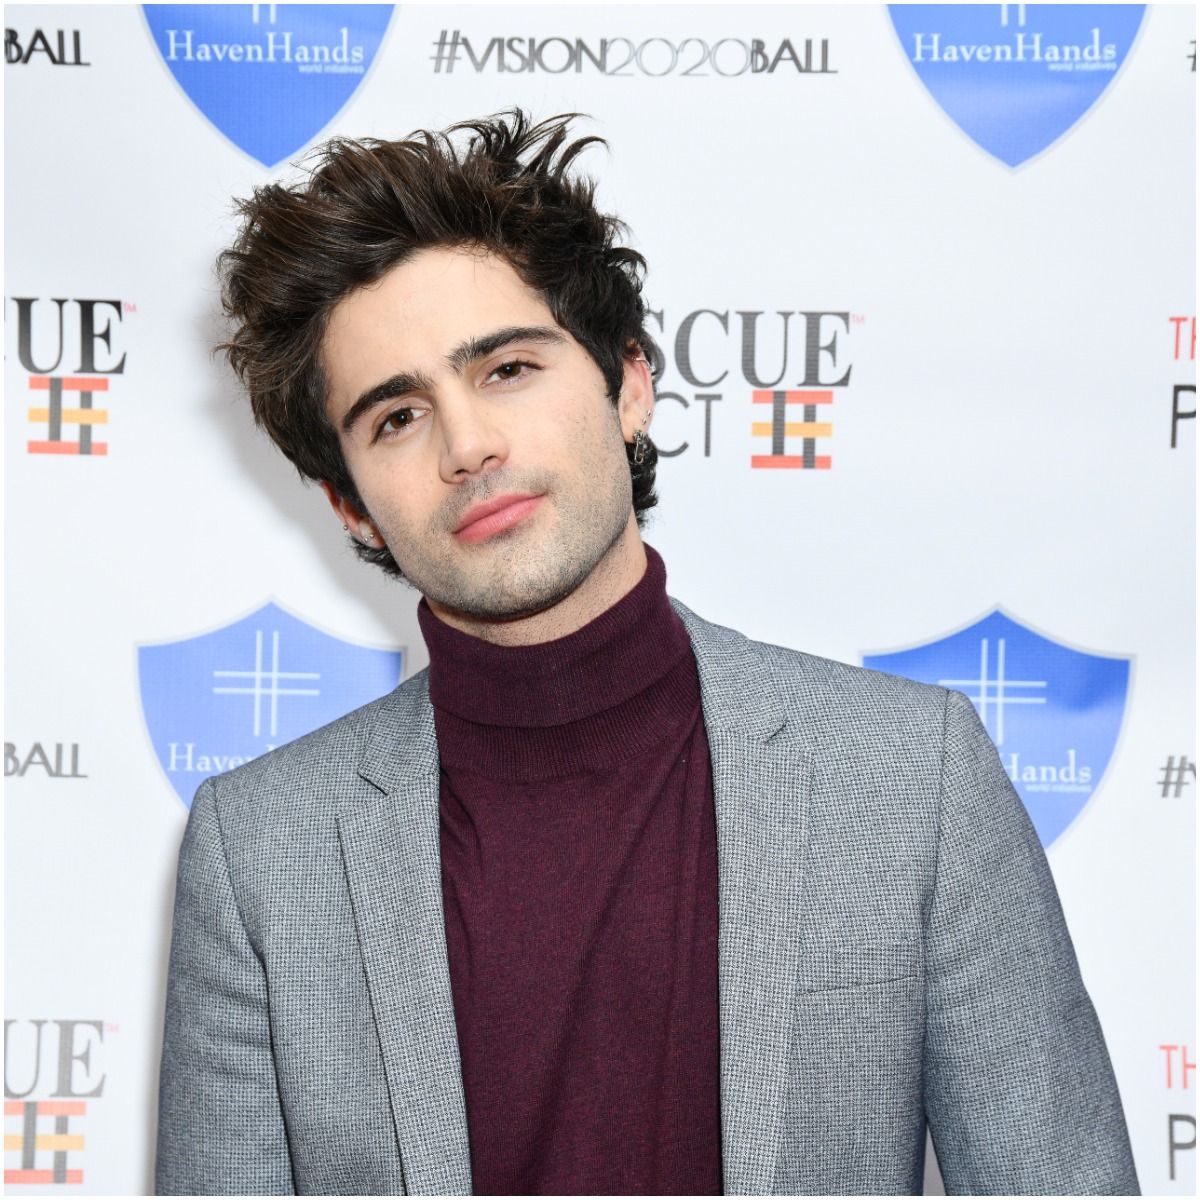 what is the net worth of Max Ehrich